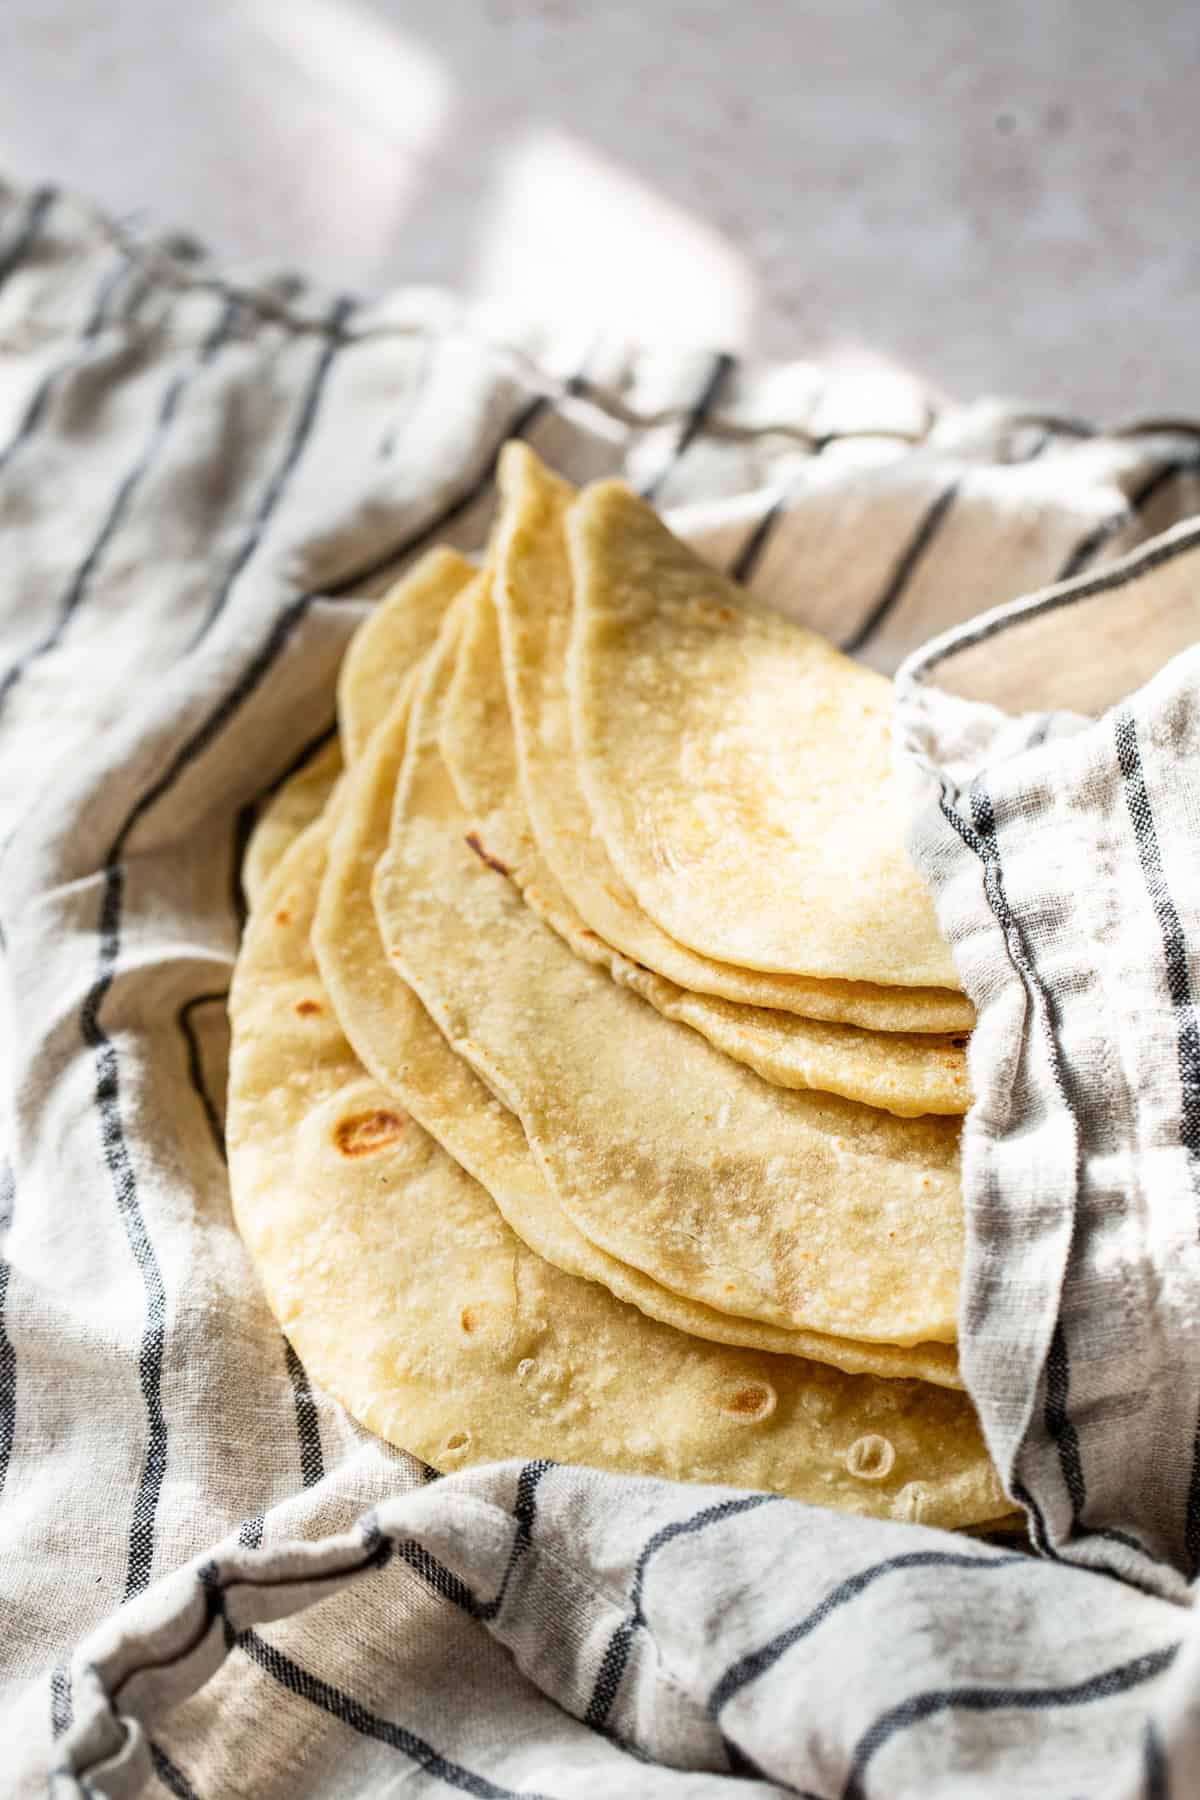 Flour tortillas in a clean kitchen towel ready to eat